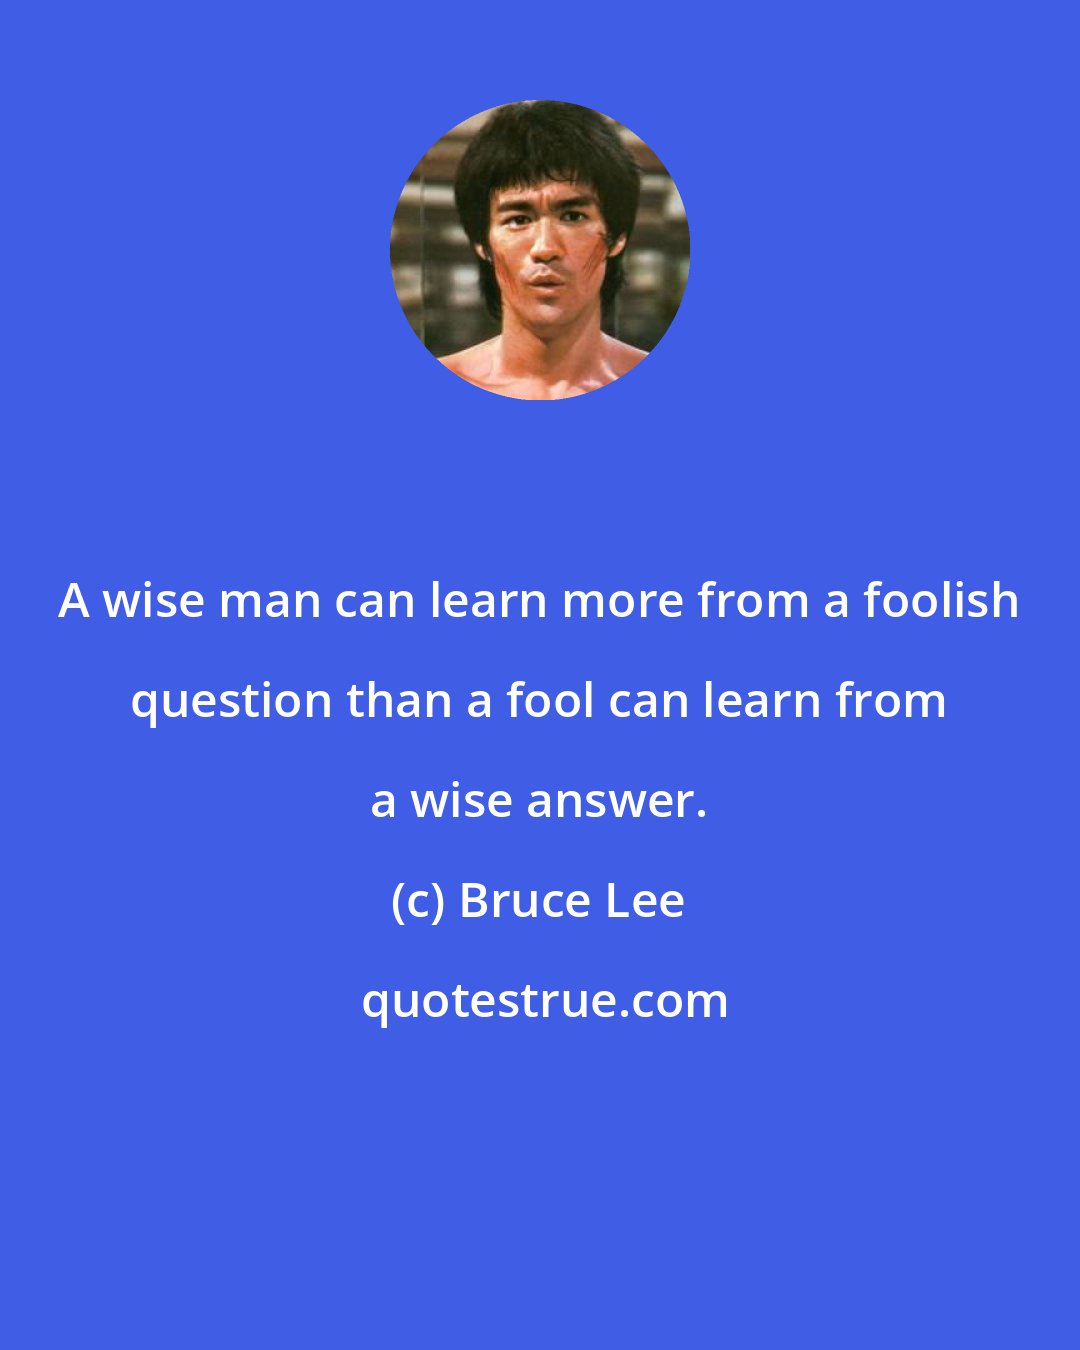 Bruce Lee: A wise man can learn more from a foolish question than a fool can learn from a wise answer.